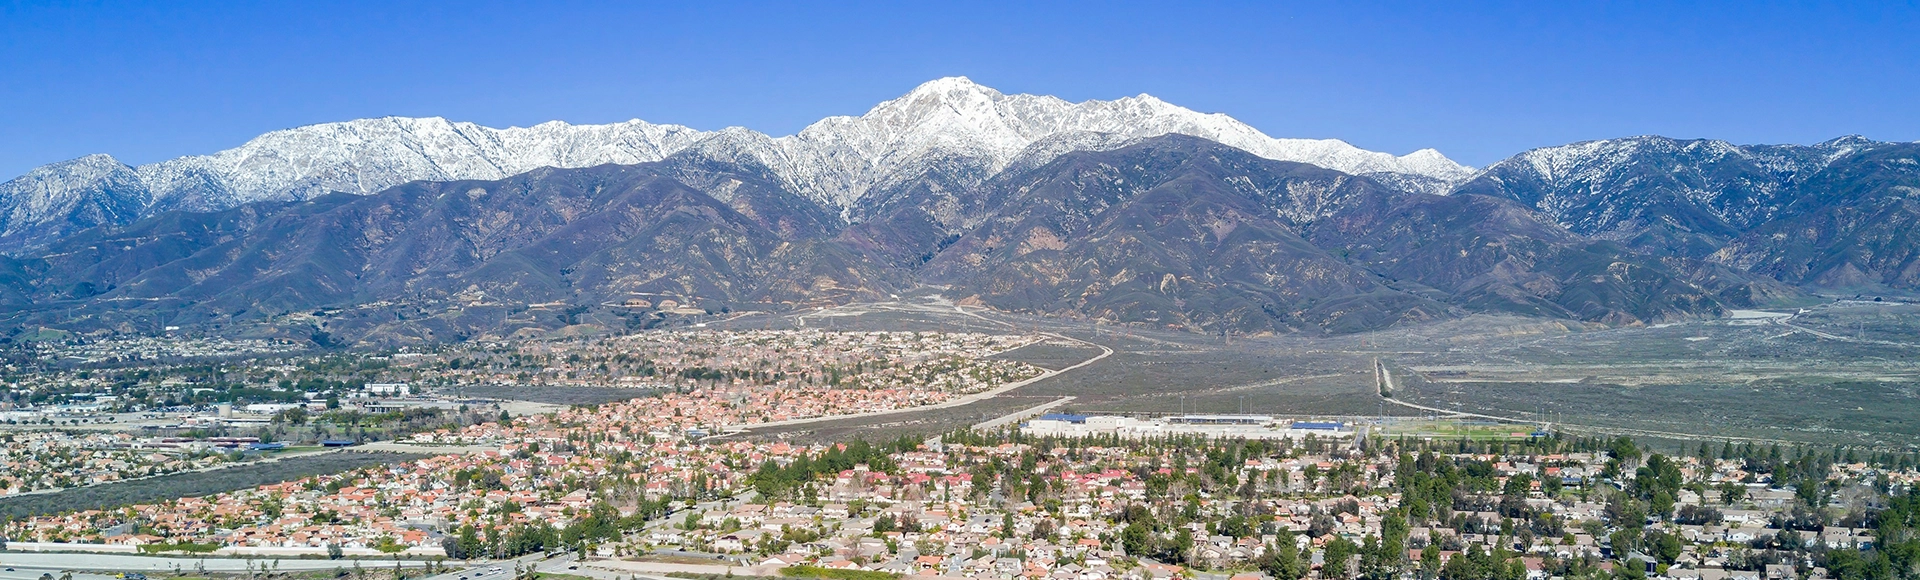 Aerial view of Rancho Cucamonga area
